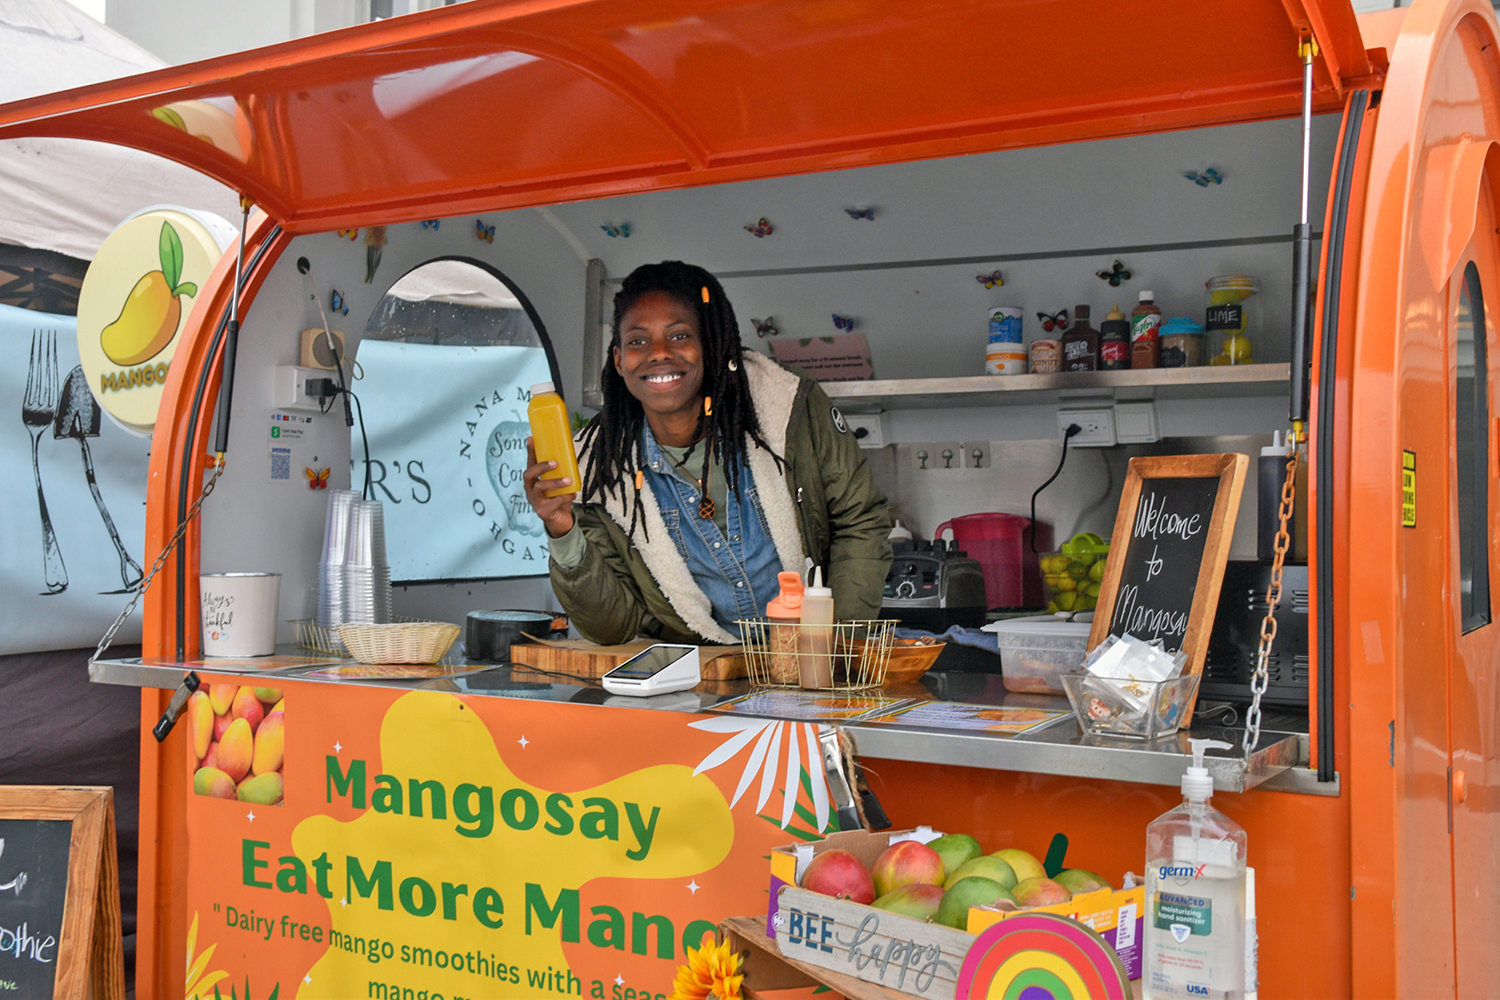 Sierra Young holding a bottle of mango juice in the mobile mango cart at FPFM